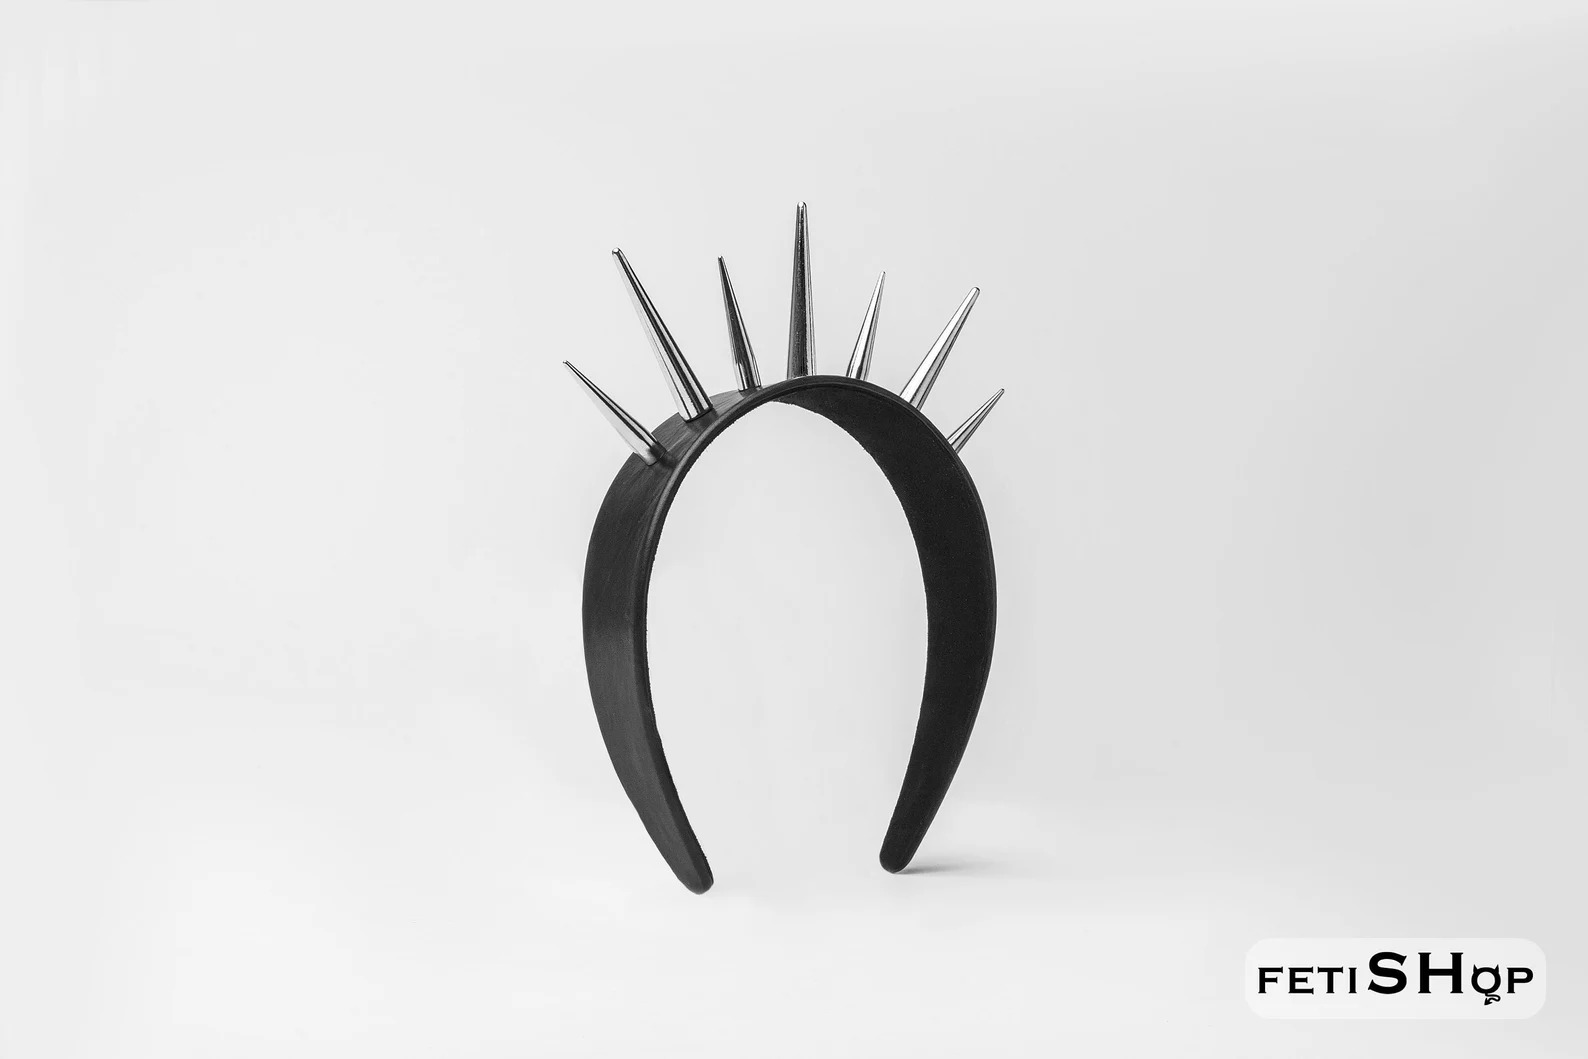 Halo leather headband with spikes